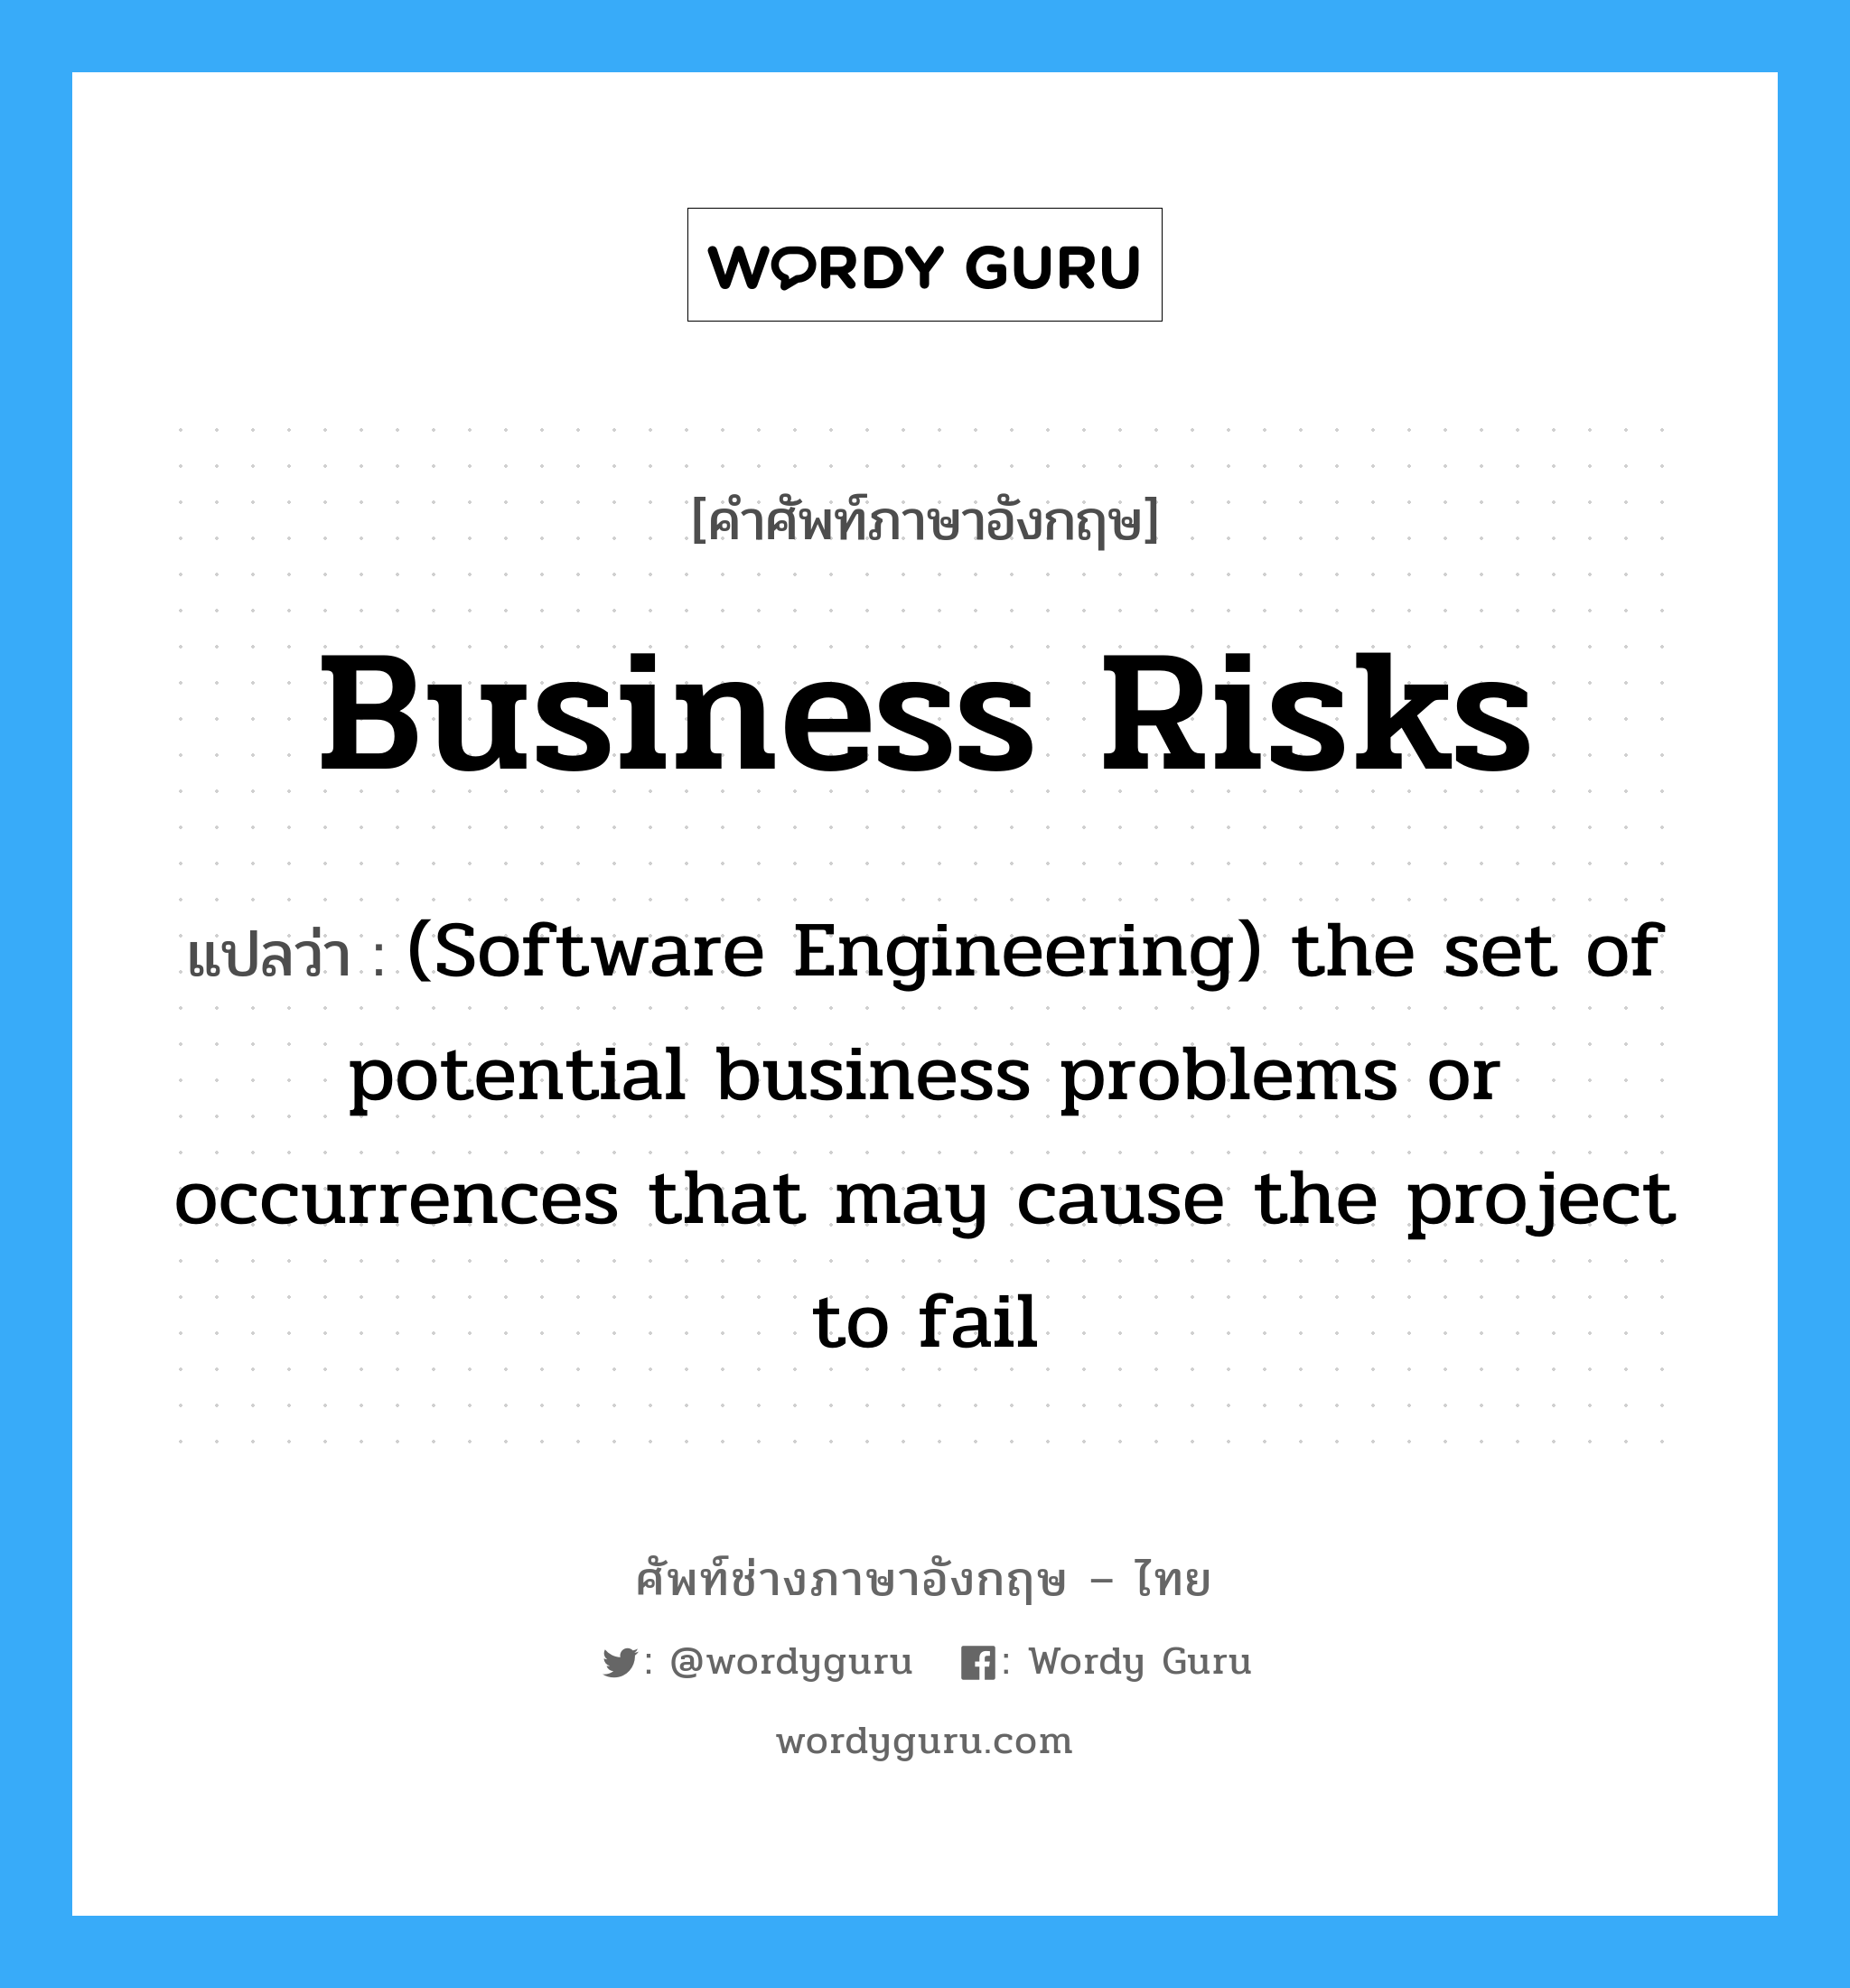 (Software Engineering) the set of potential technical problems or occurrences that may cause the project to fail ภาษาอังกฤษ?, คำศัพท์ช่างภาษาอังกฤษ - ไทย (Software Engineering) the set of potential business problems or occurrences that may cause the project to fail คำศัพท์ภาษาอังกฤษ (Software Engineering) the set of potential business problems or occurrences that may cause the project to fail แปลว่า Business risks